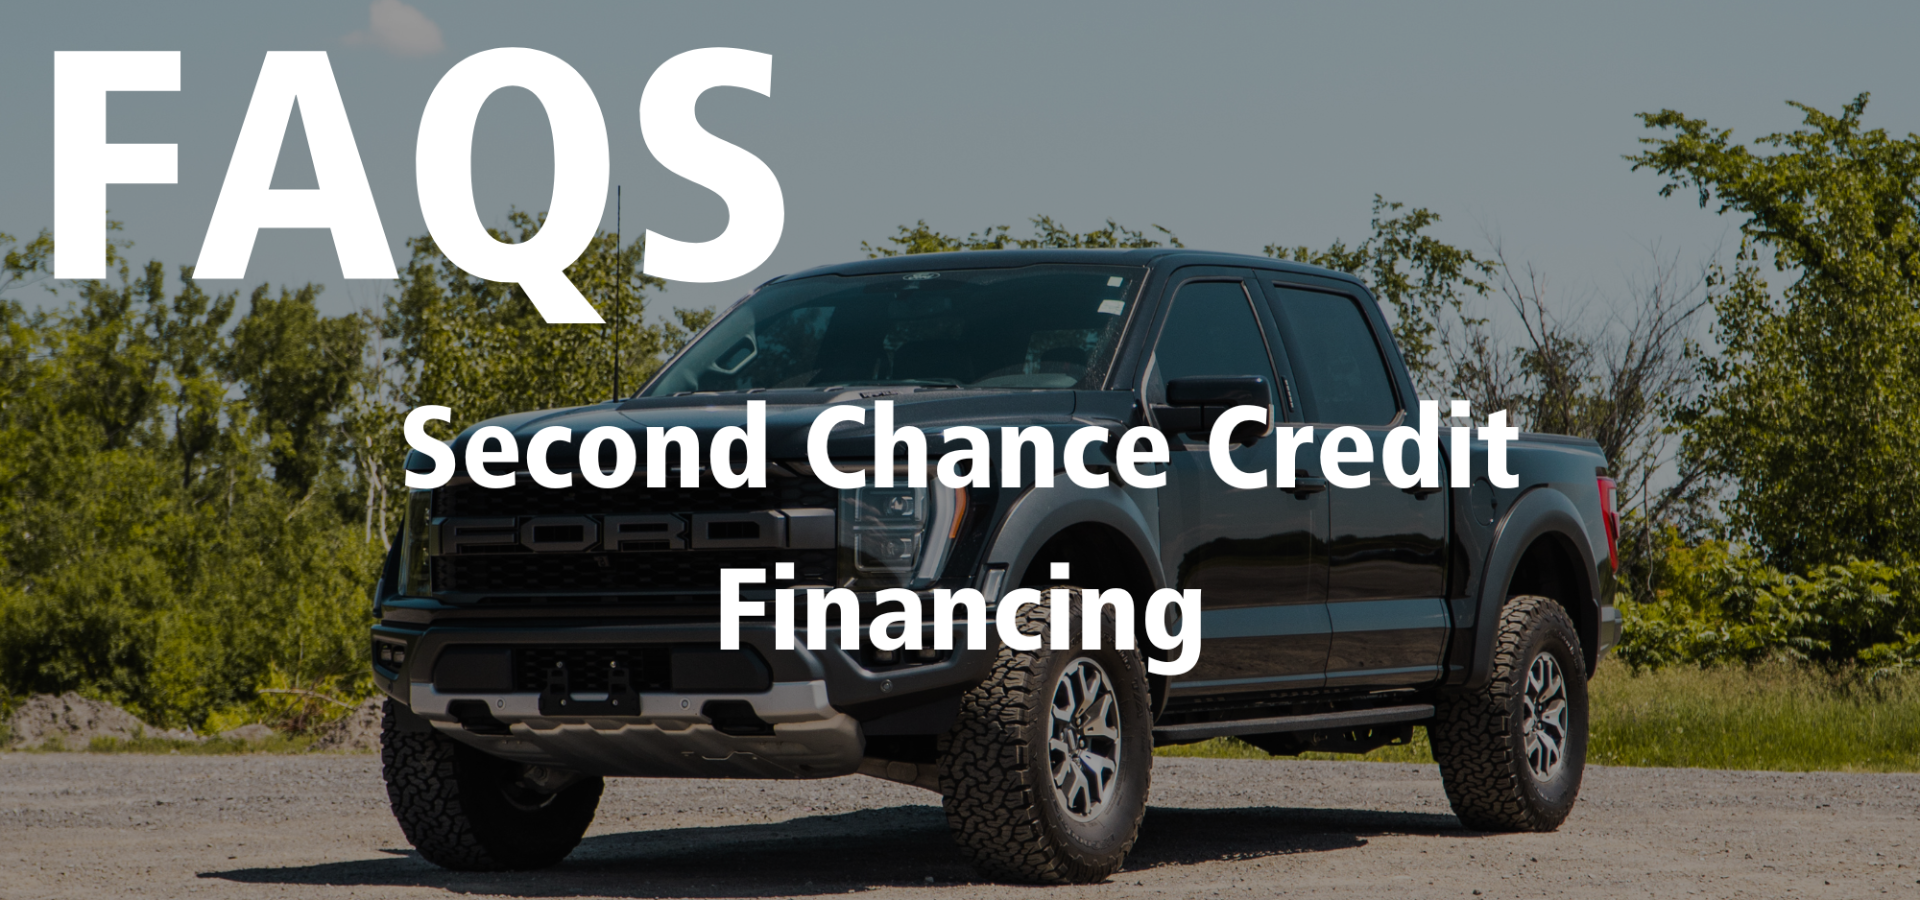 Questions Frequently Asked About Second Chance Credit Financing